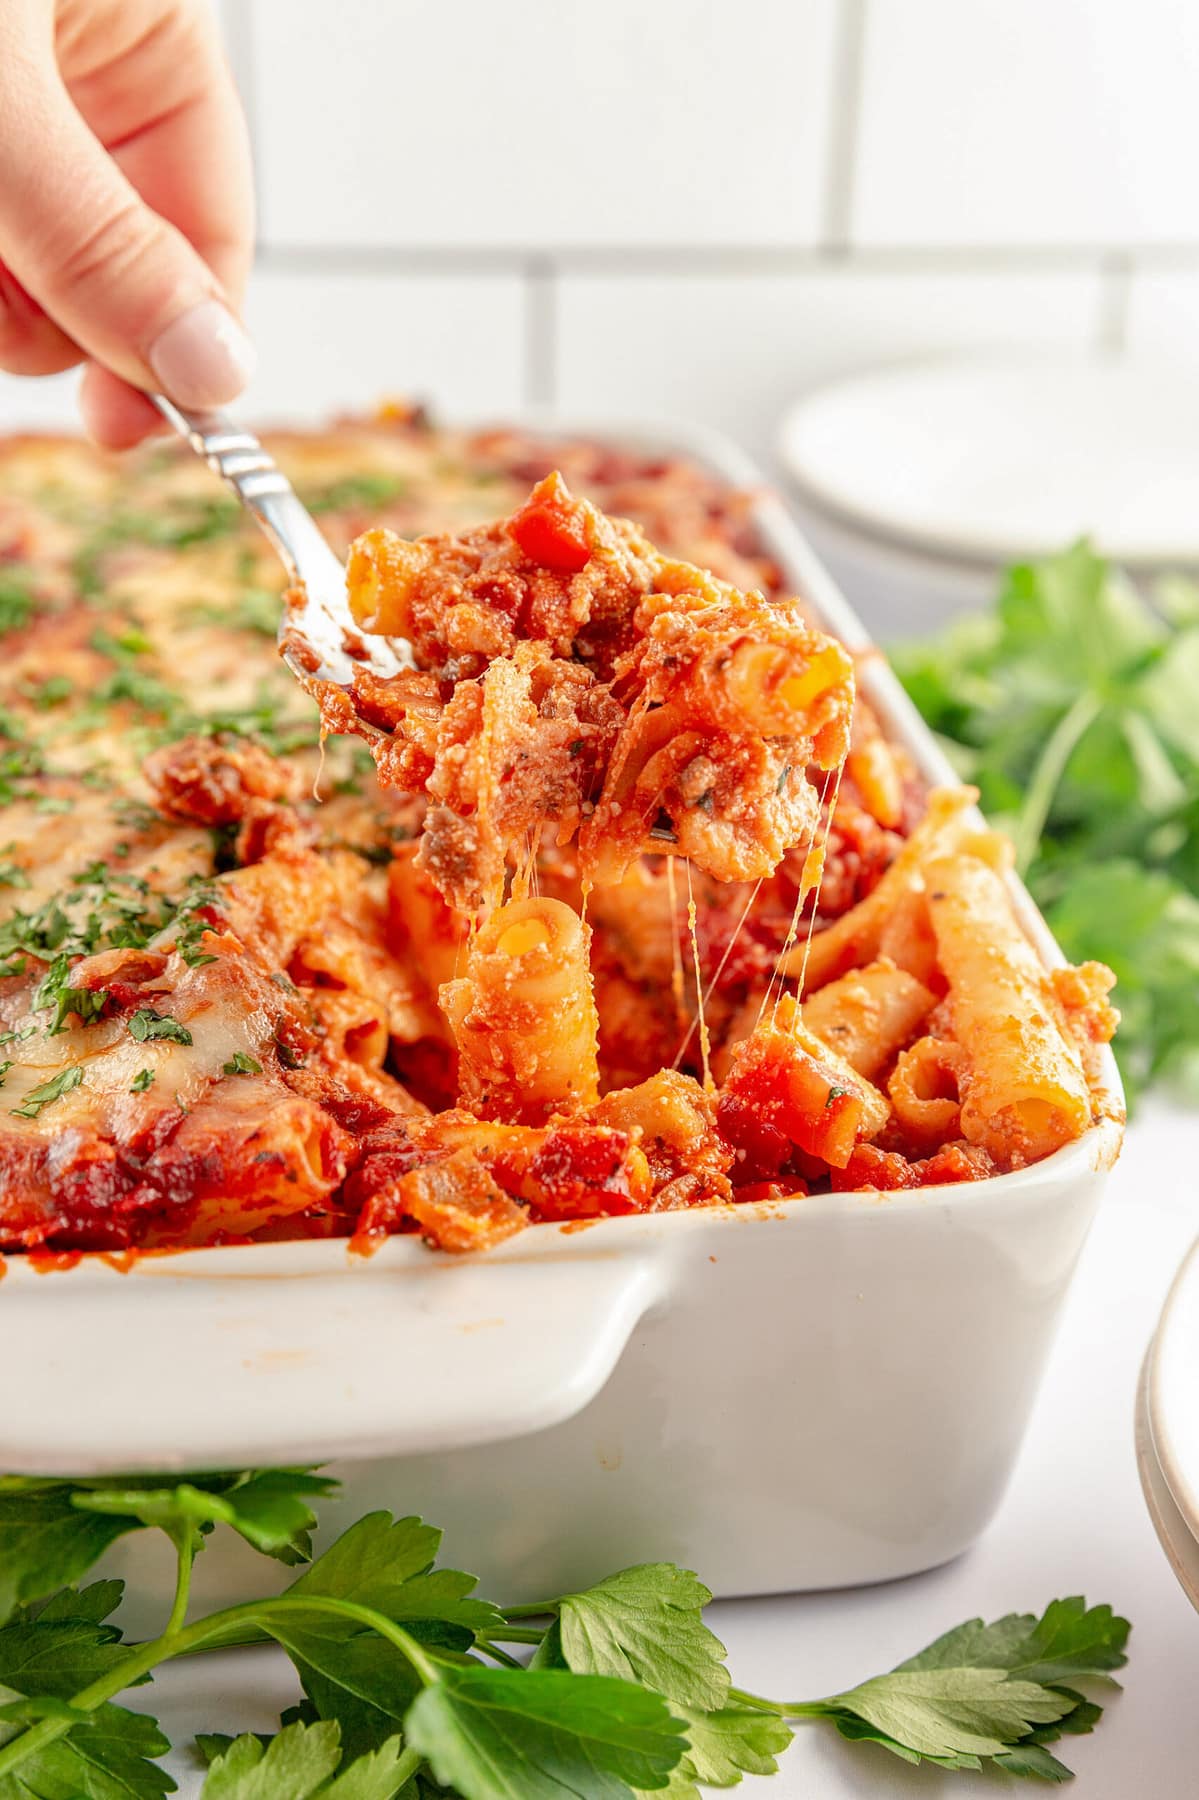 Baked ziti pasta being scooped out of a casserole dish by a white woman's hand holding a silver spoon.